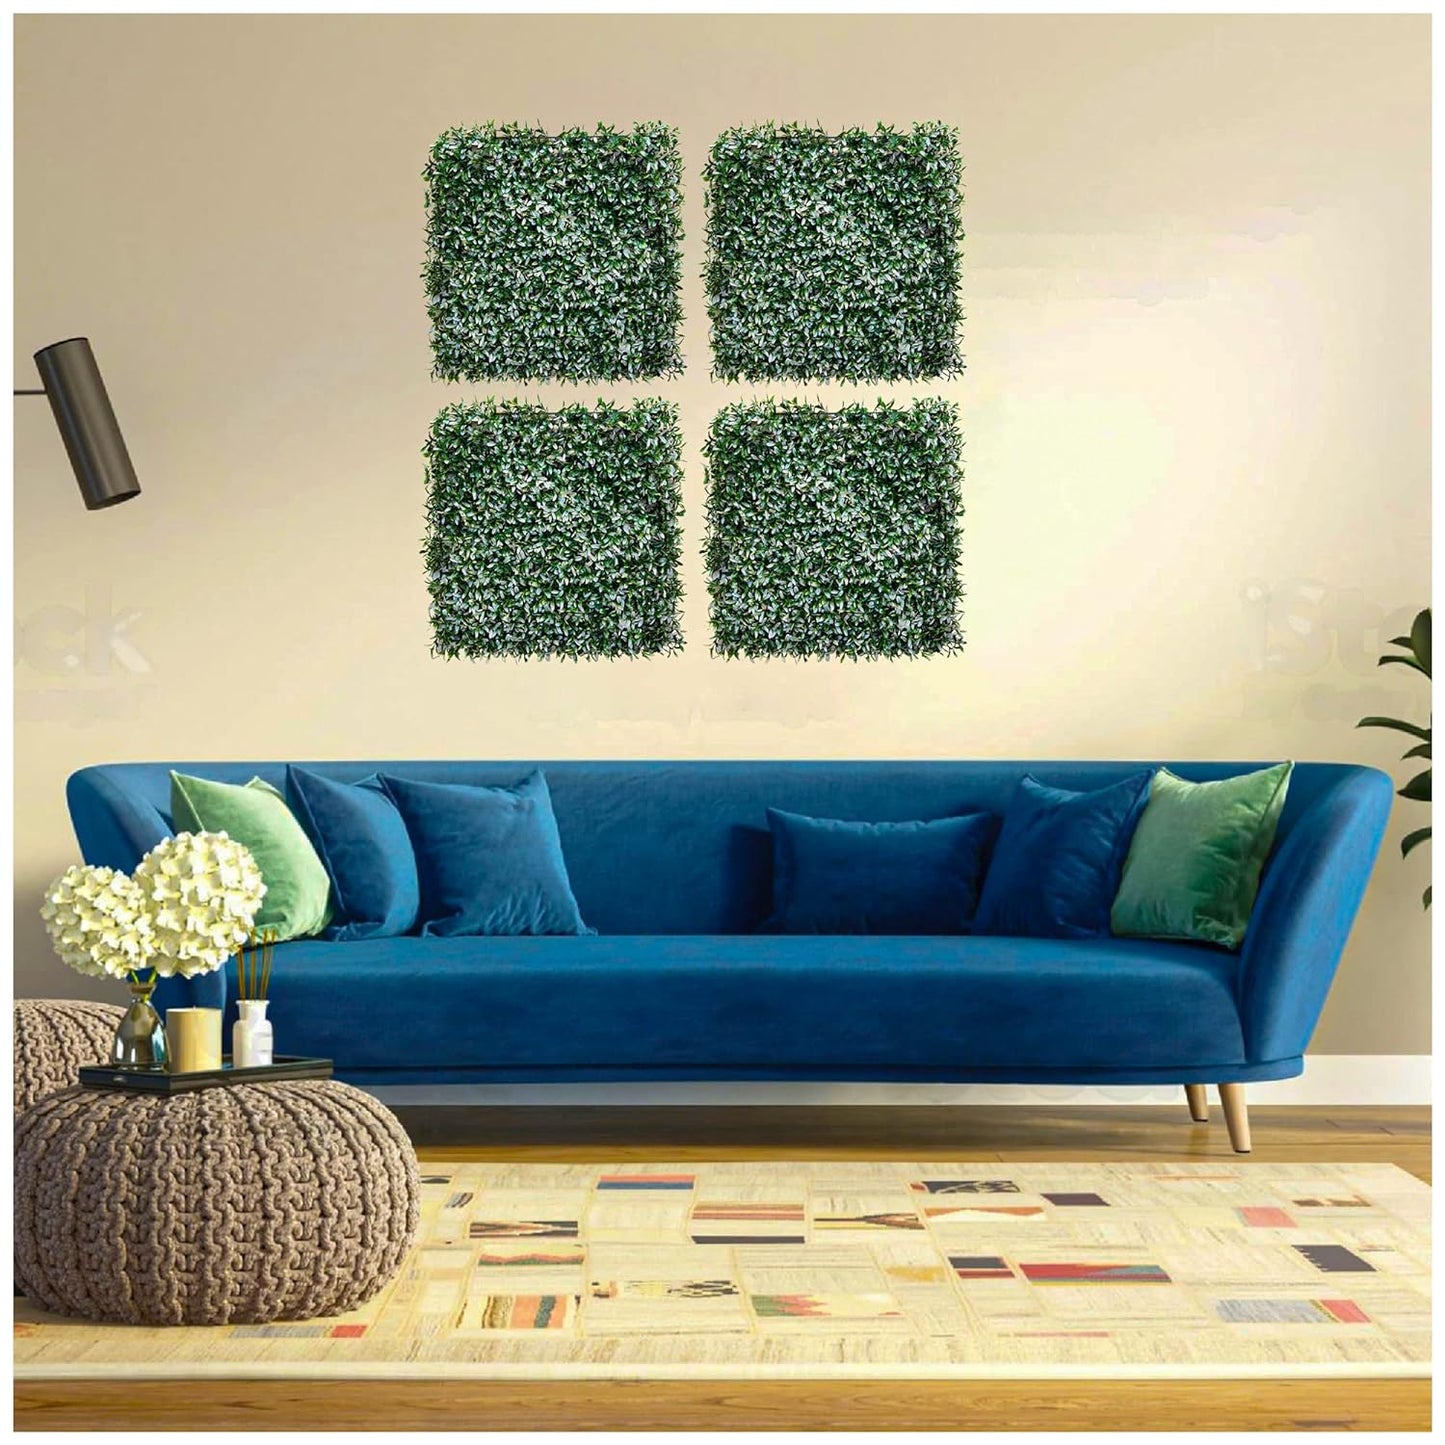 Artificial Vertical Wall Mat for Indoor & Outdoor Walls 50 cm x  50 cm, Leaves White and Green